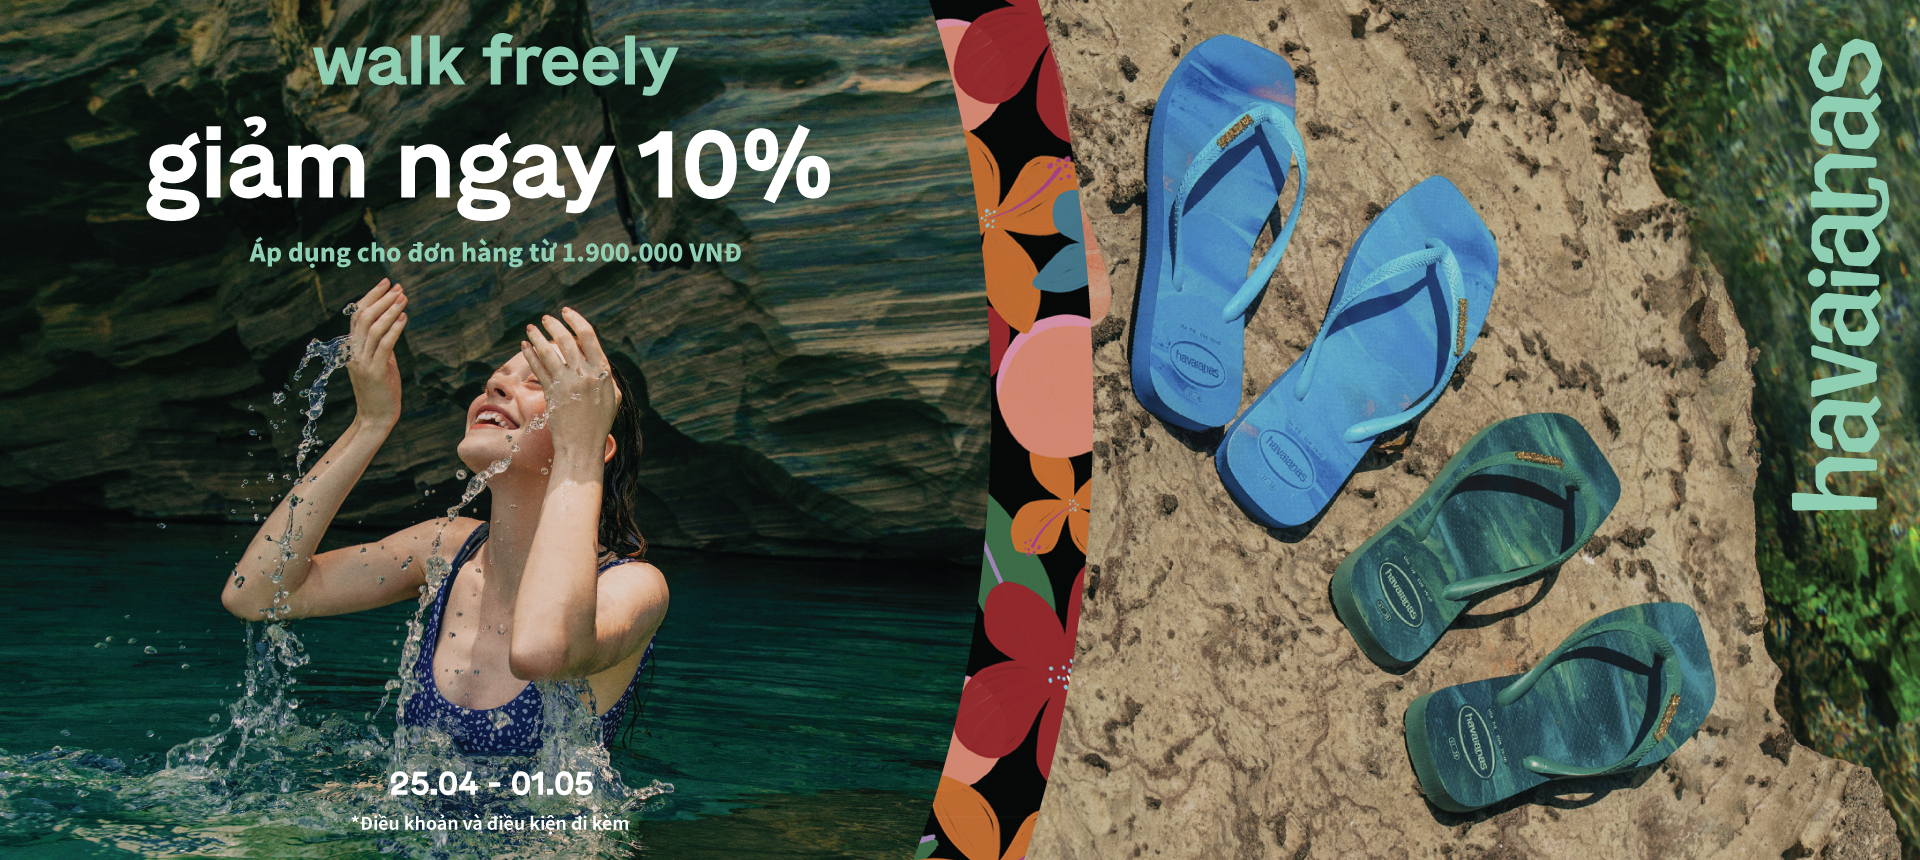 WALK FREELY THIS HOLIDAYS WITH HOT DEAL FROM HAVAIANAS